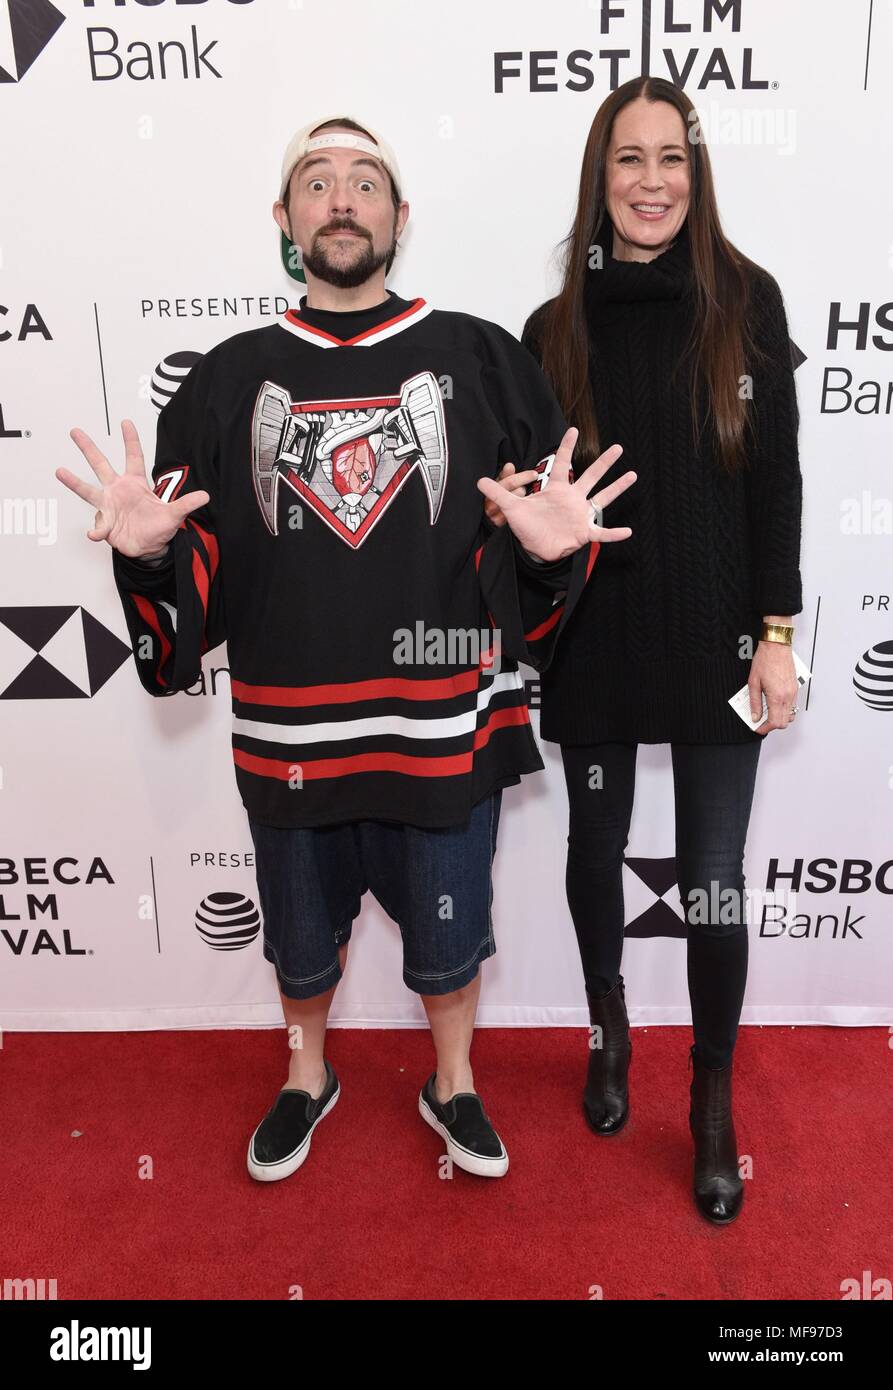 New York, NY, USA. 24th Apr, 2018. Kevin Smith, Jennifer Schwalbach Smith at arrivals for ALL THESE SMALL MOMENTS Premiere at the Tribeca Film Festival 2018, School of Visual Arts (SVA) Theatre, New York, NY April 24, 2018. Credit: Derek Storm/Everett Collection/Alamy Live News Stock Photo